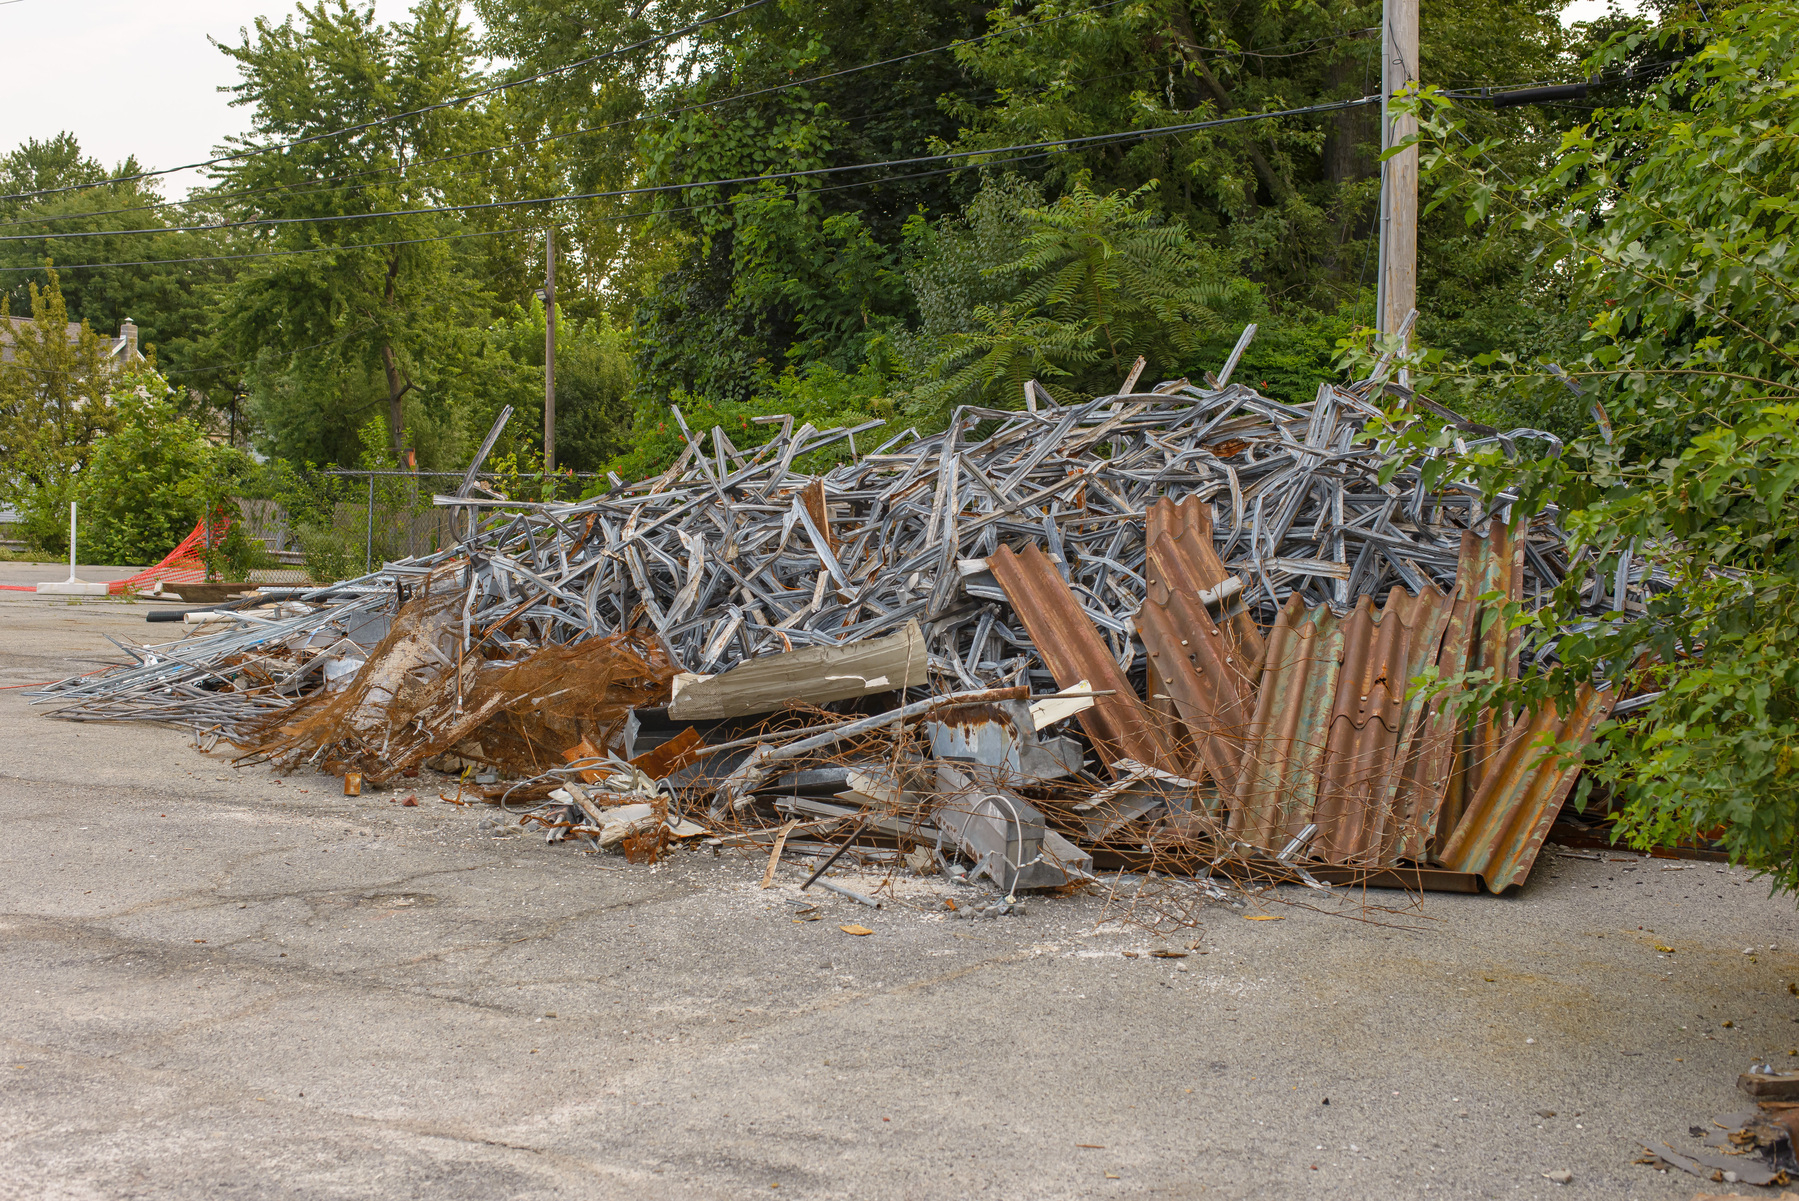 pile of metal demolition debris on asphalt surface with trees and weeds in the background